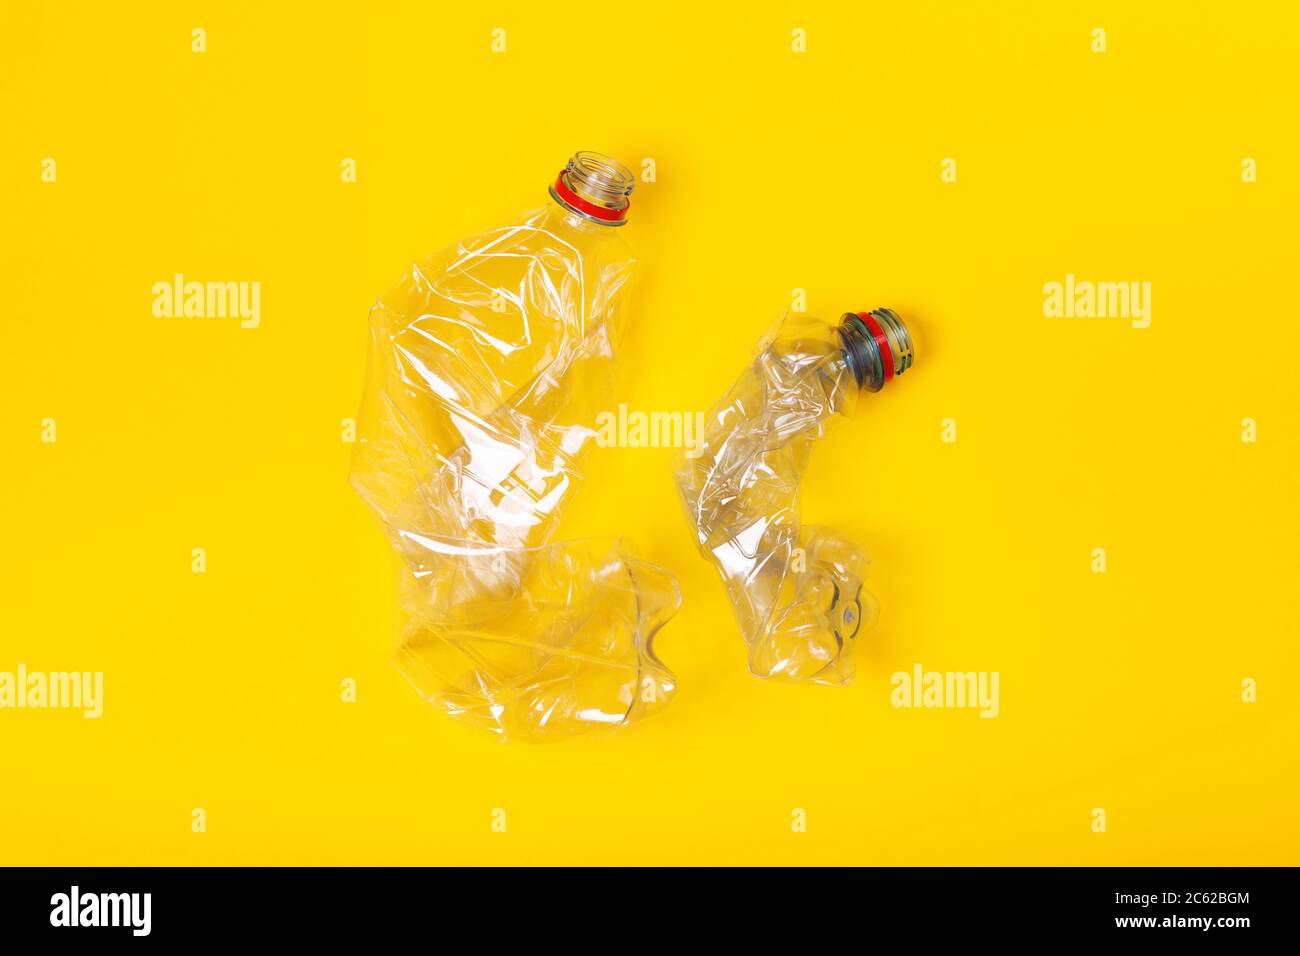 Two used plastic bottles on yellow background. The concept of pollution of the planet and the oceans with plastic waste. Stock Photo